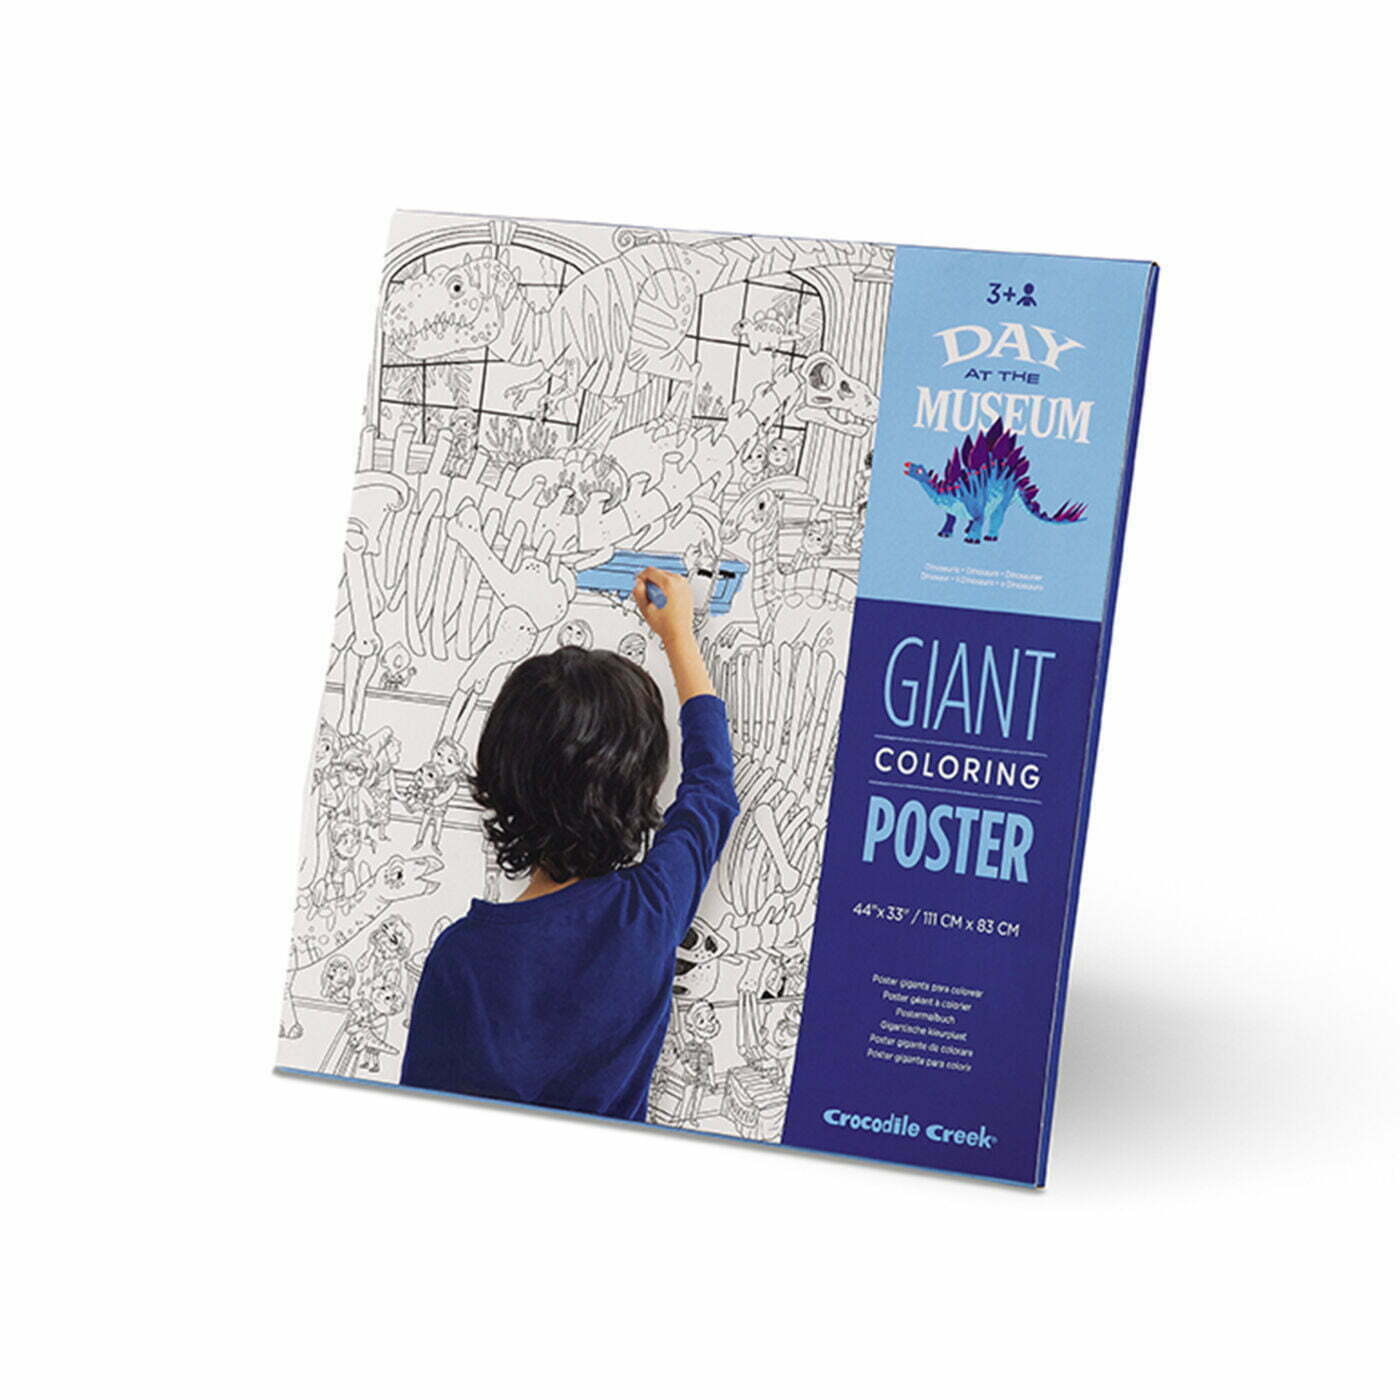 Giant Colouring Poster - Day at the Dinosaur Museum